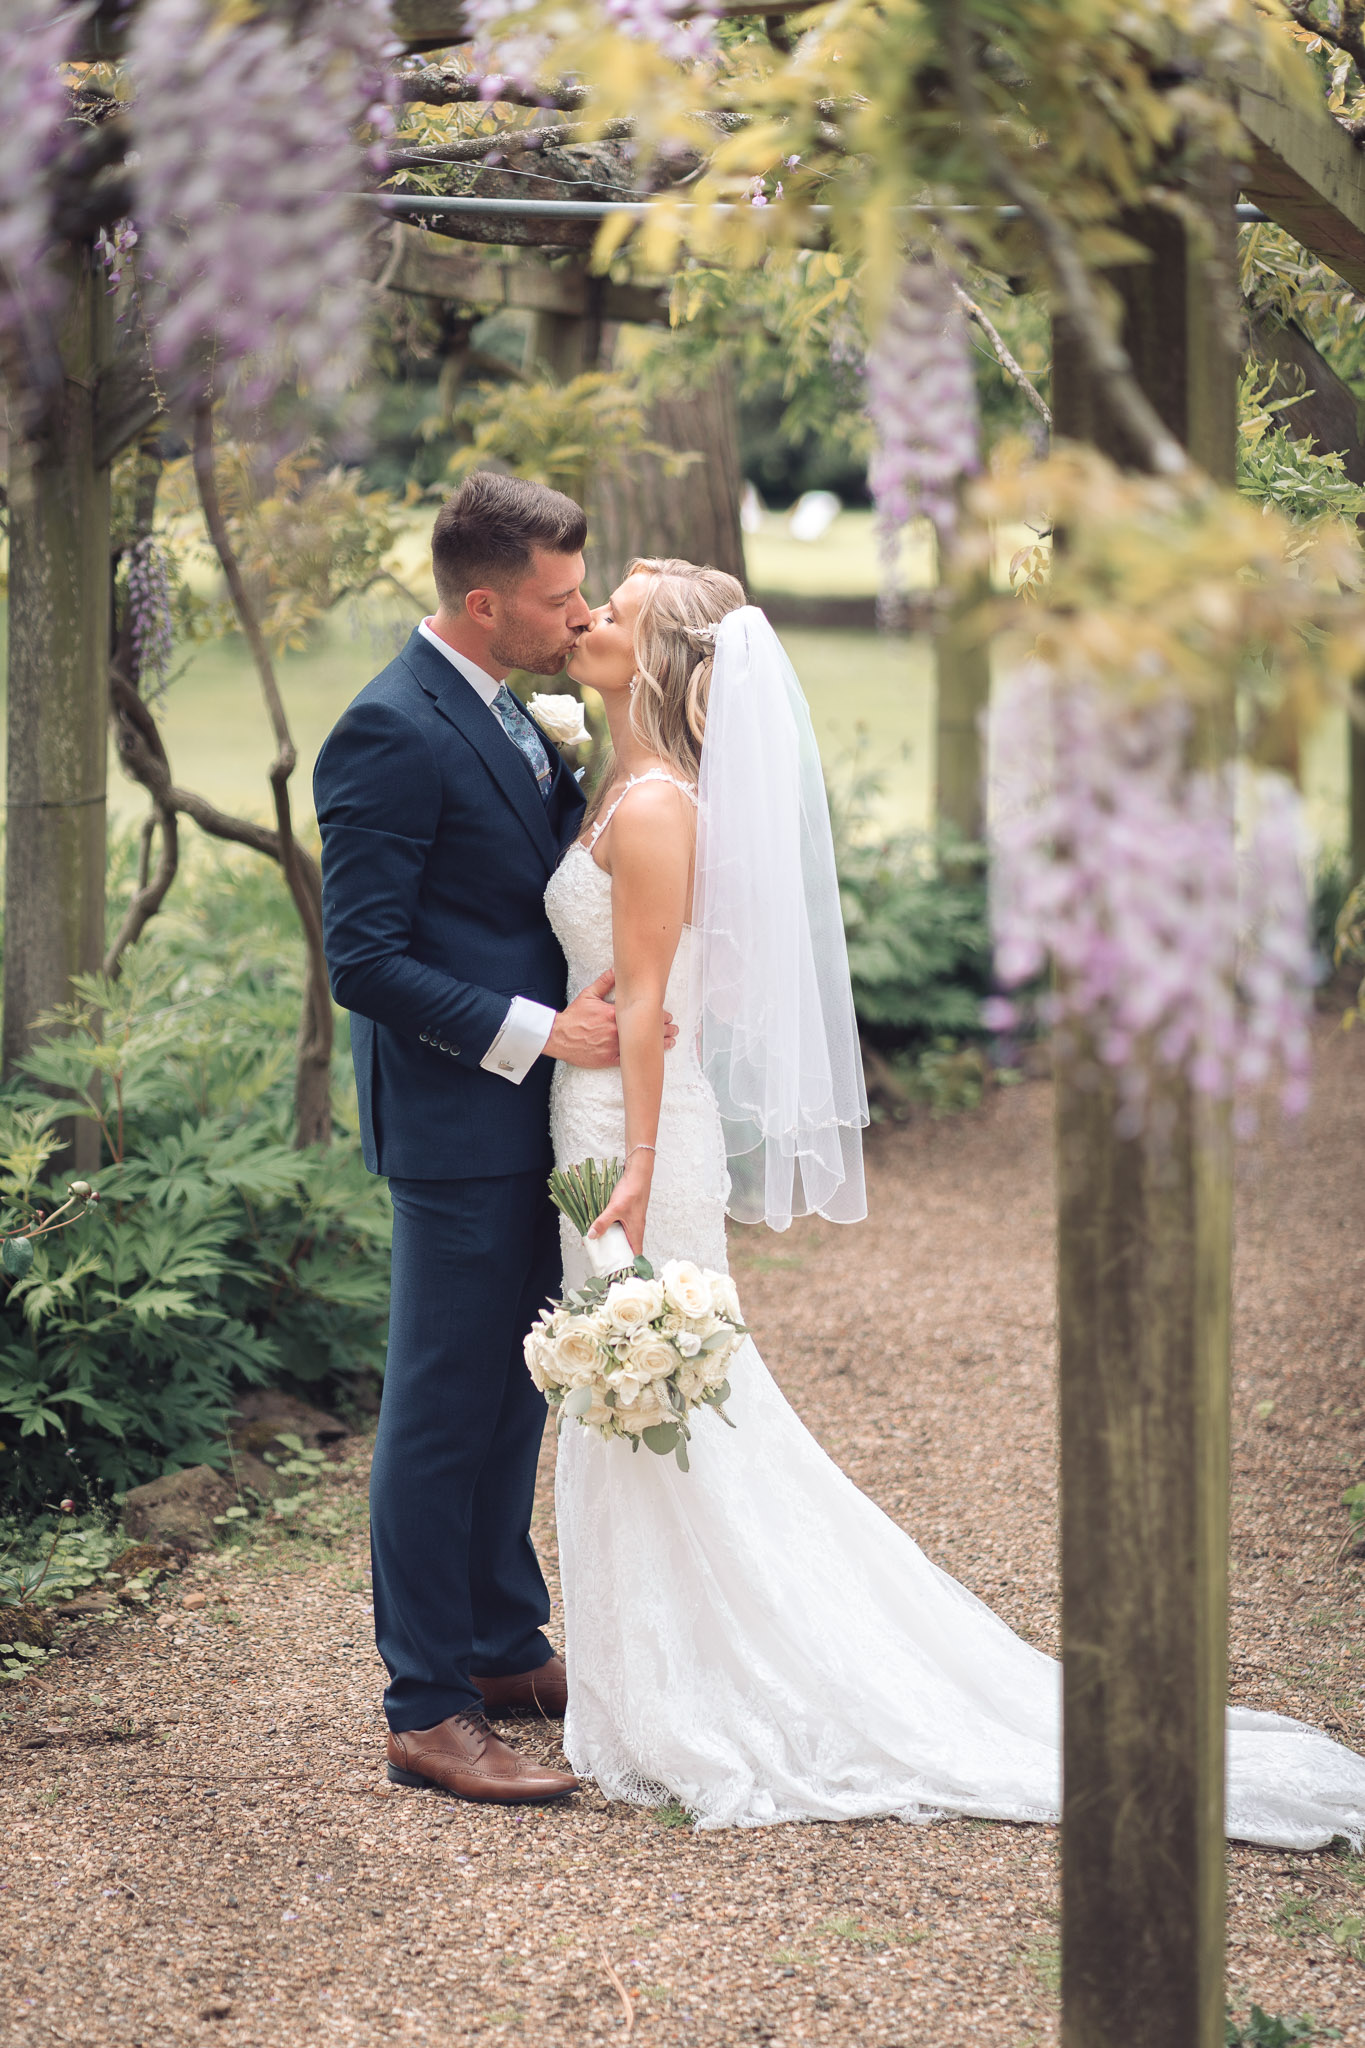 bride and groom at fanhams hall May wedding in wisteria